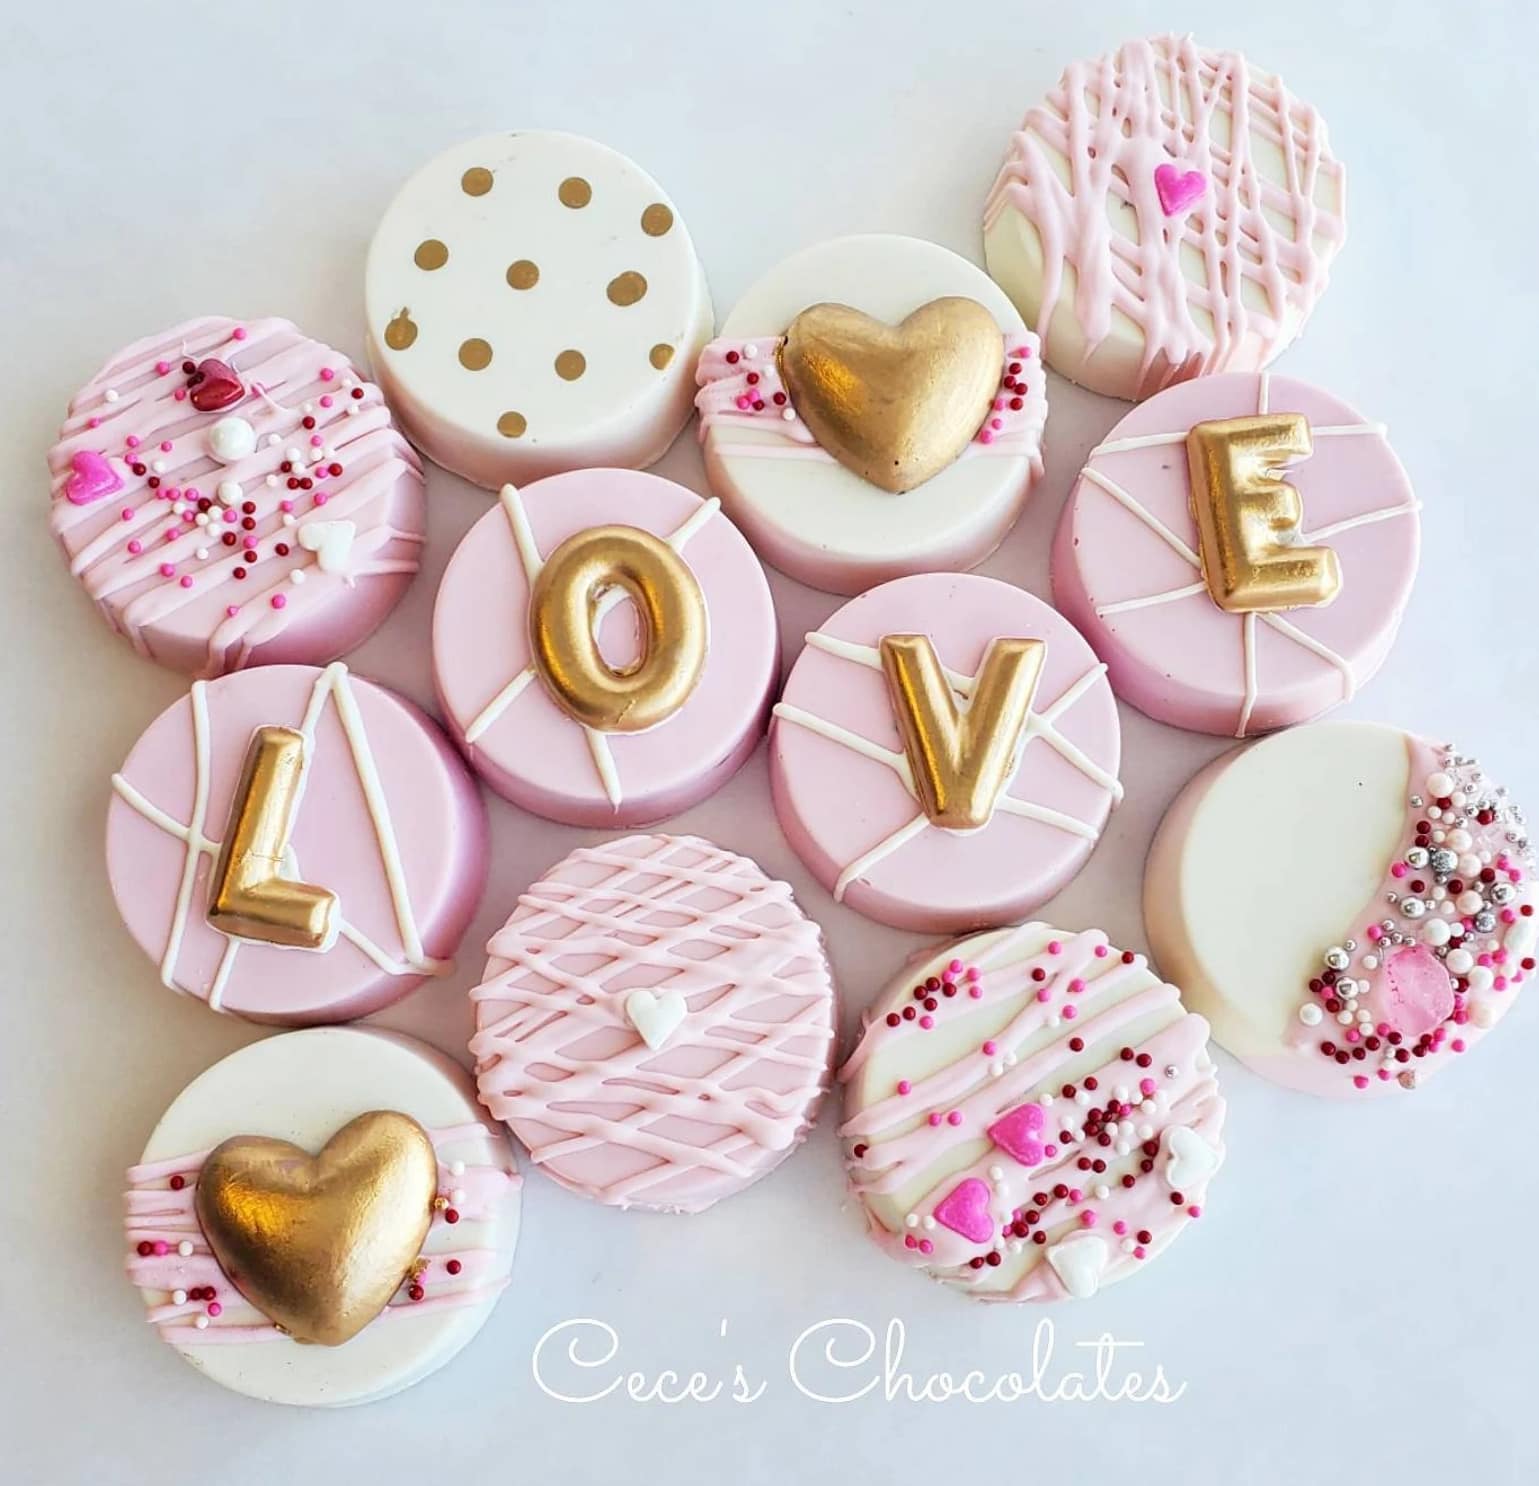 Pink, white and gold decorated chocolate dipped oreos 